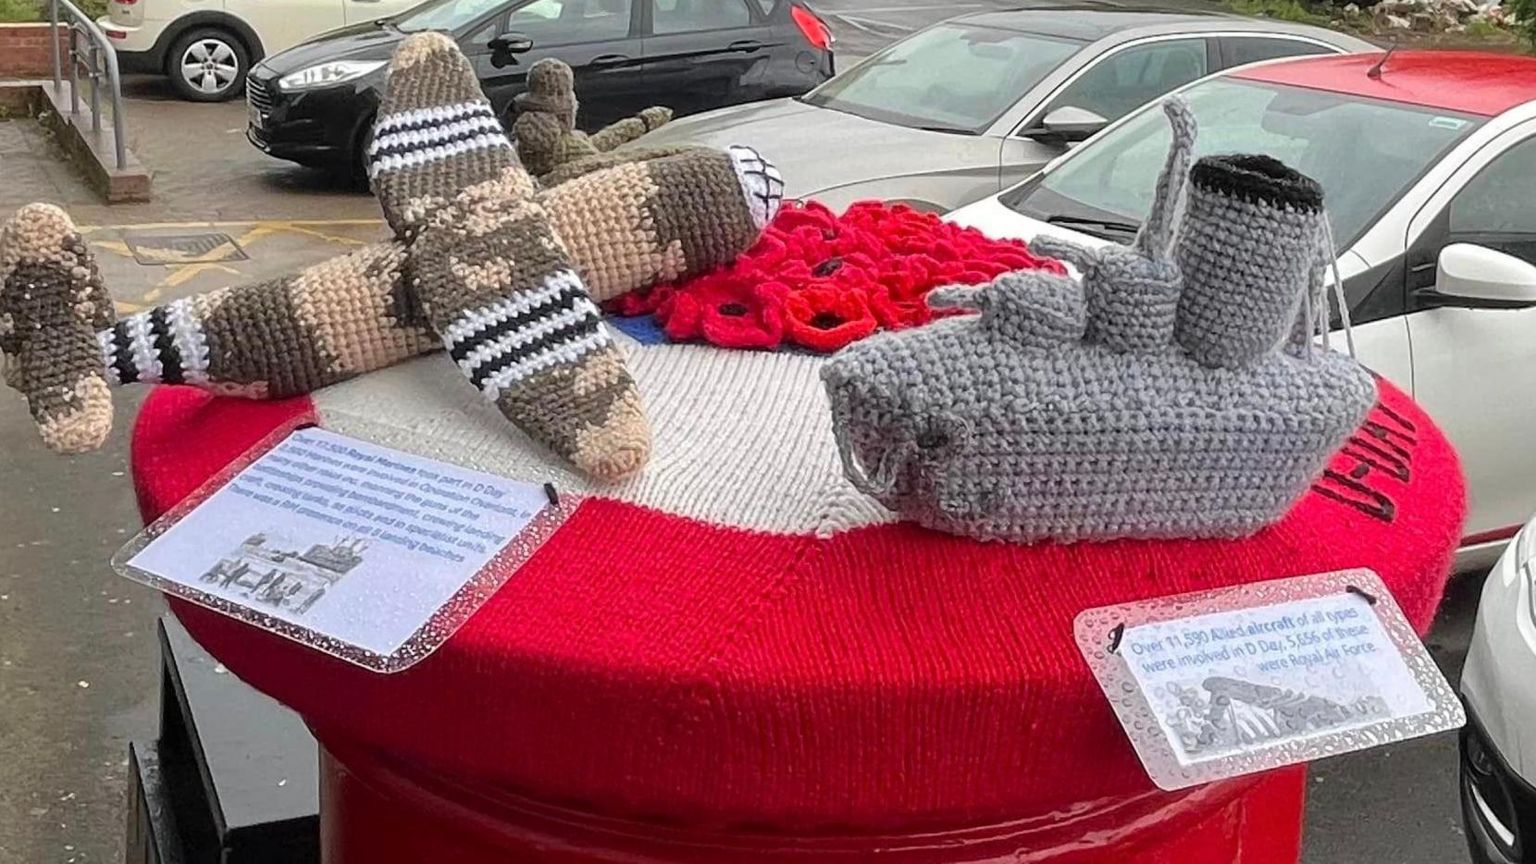 Knitted display honouring D-Day